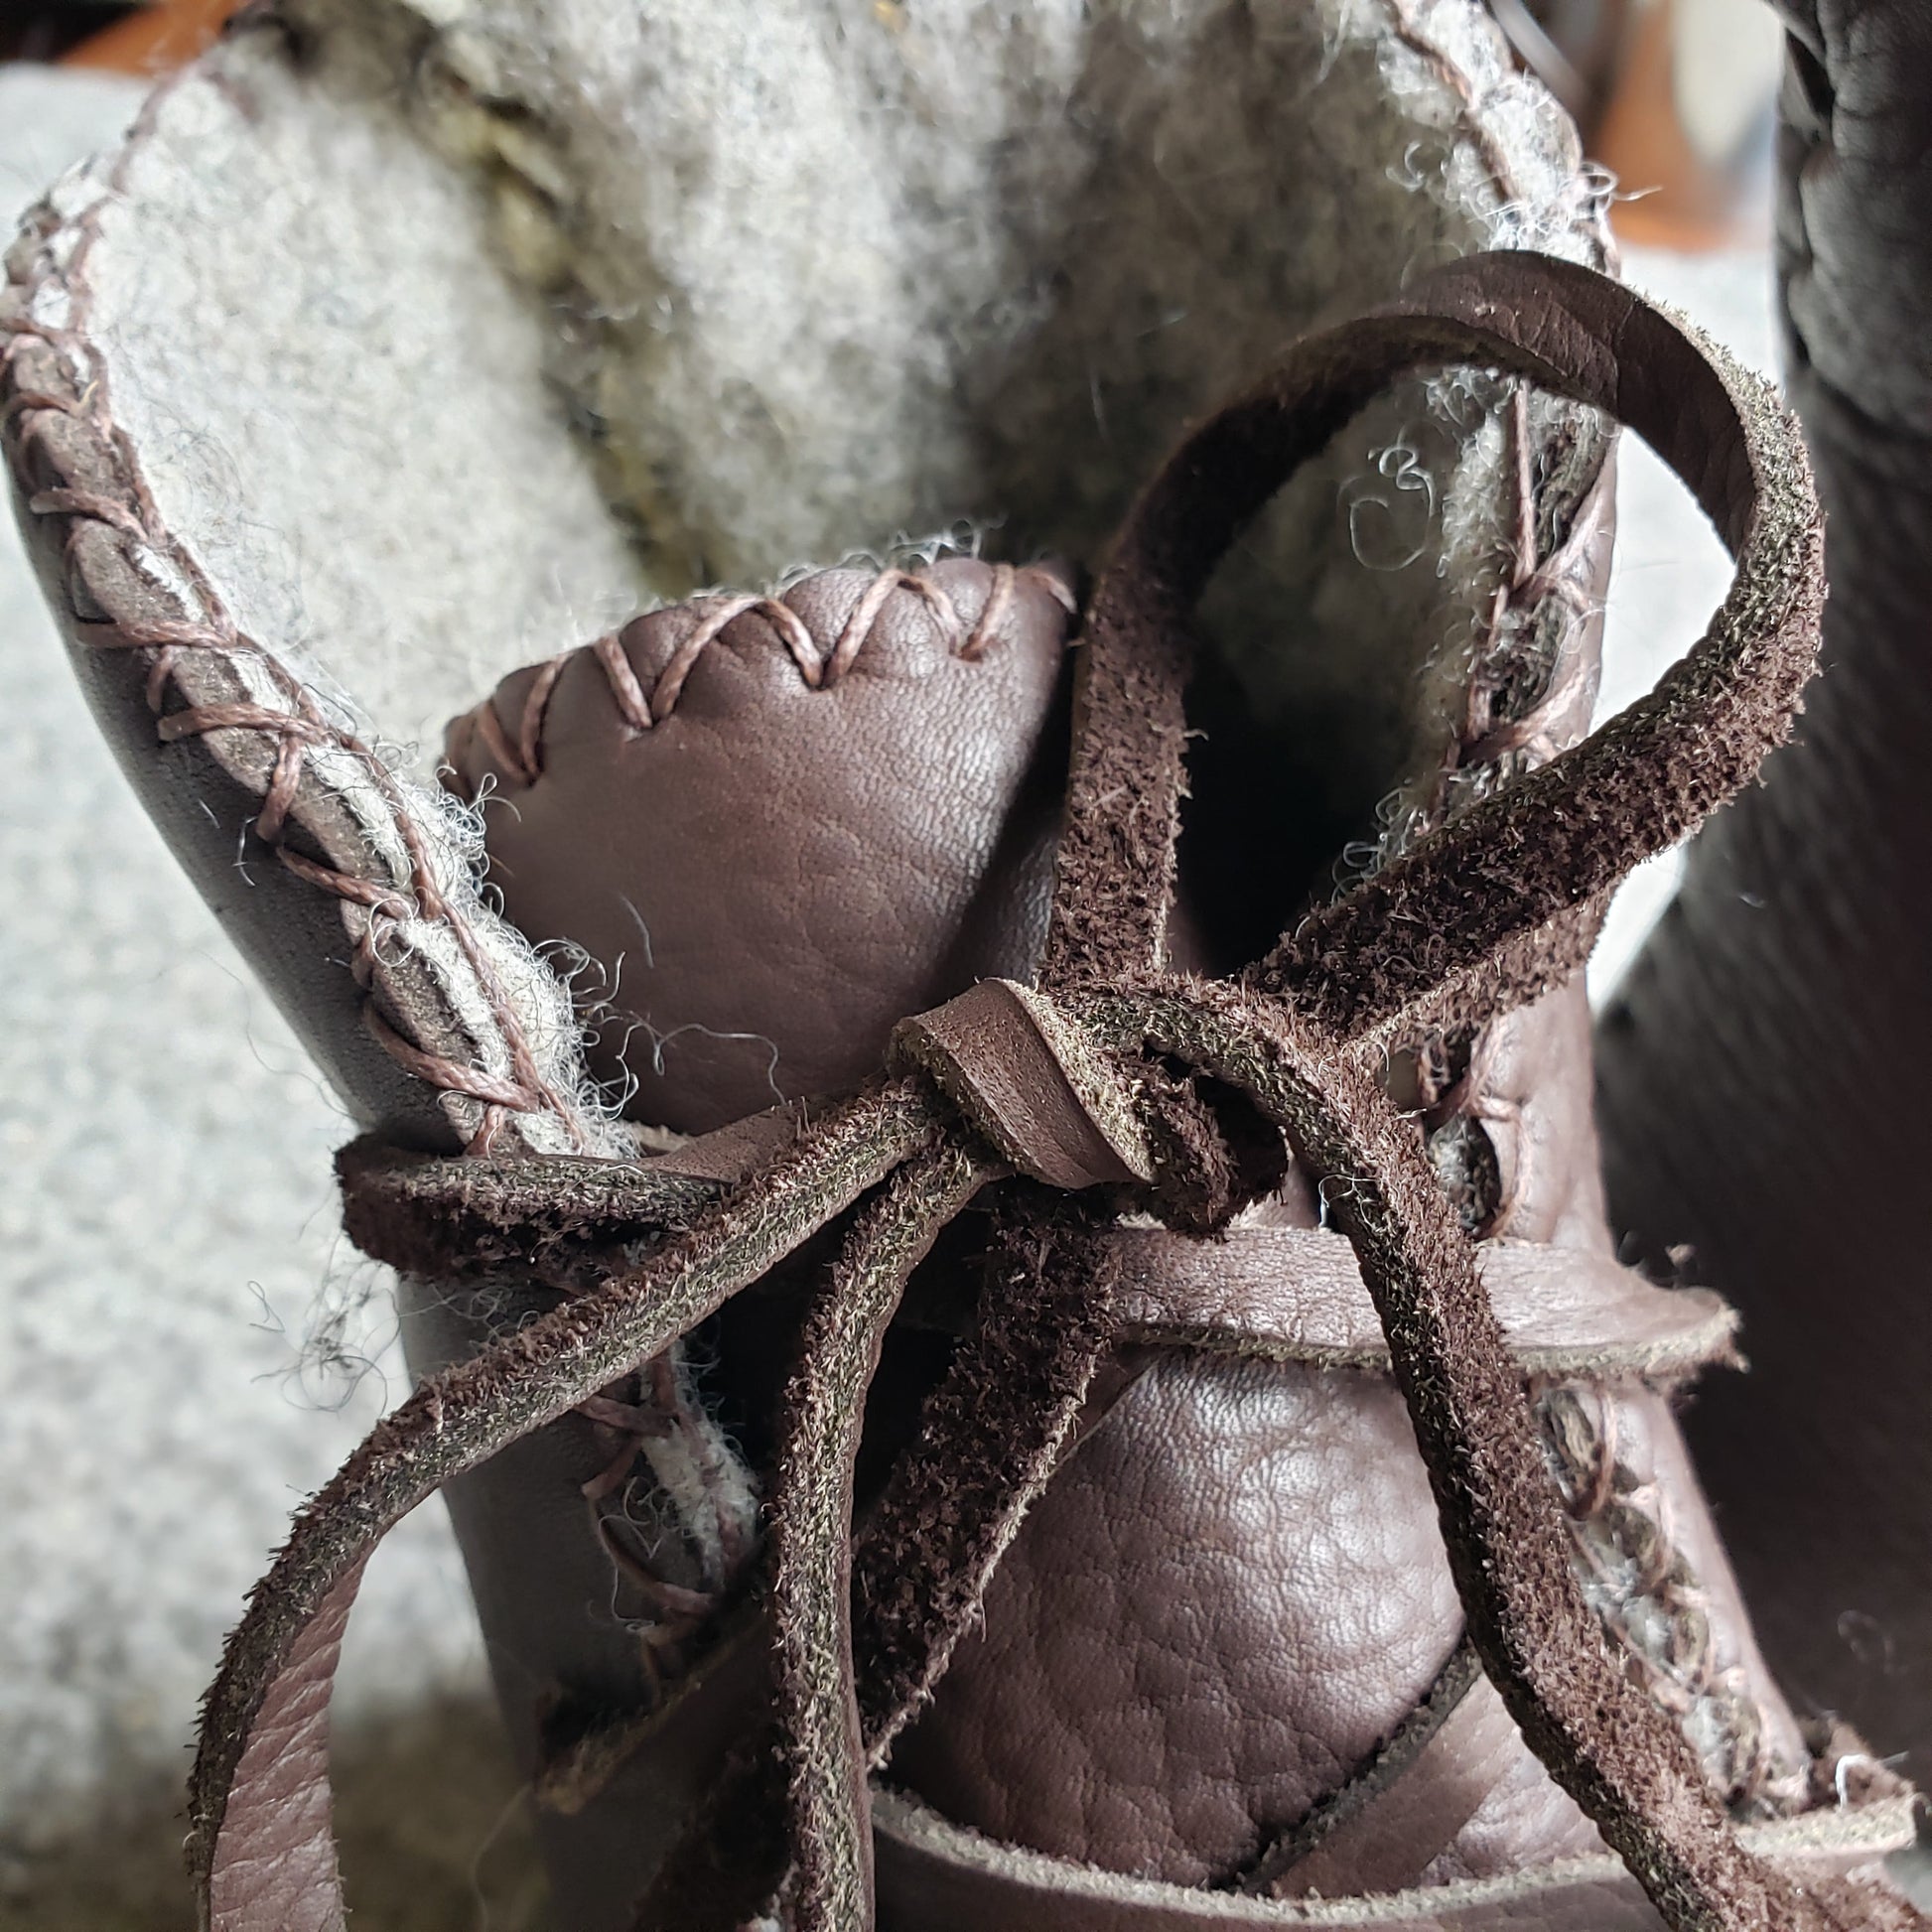 Barefoot-Boots Lined With Felt Wool